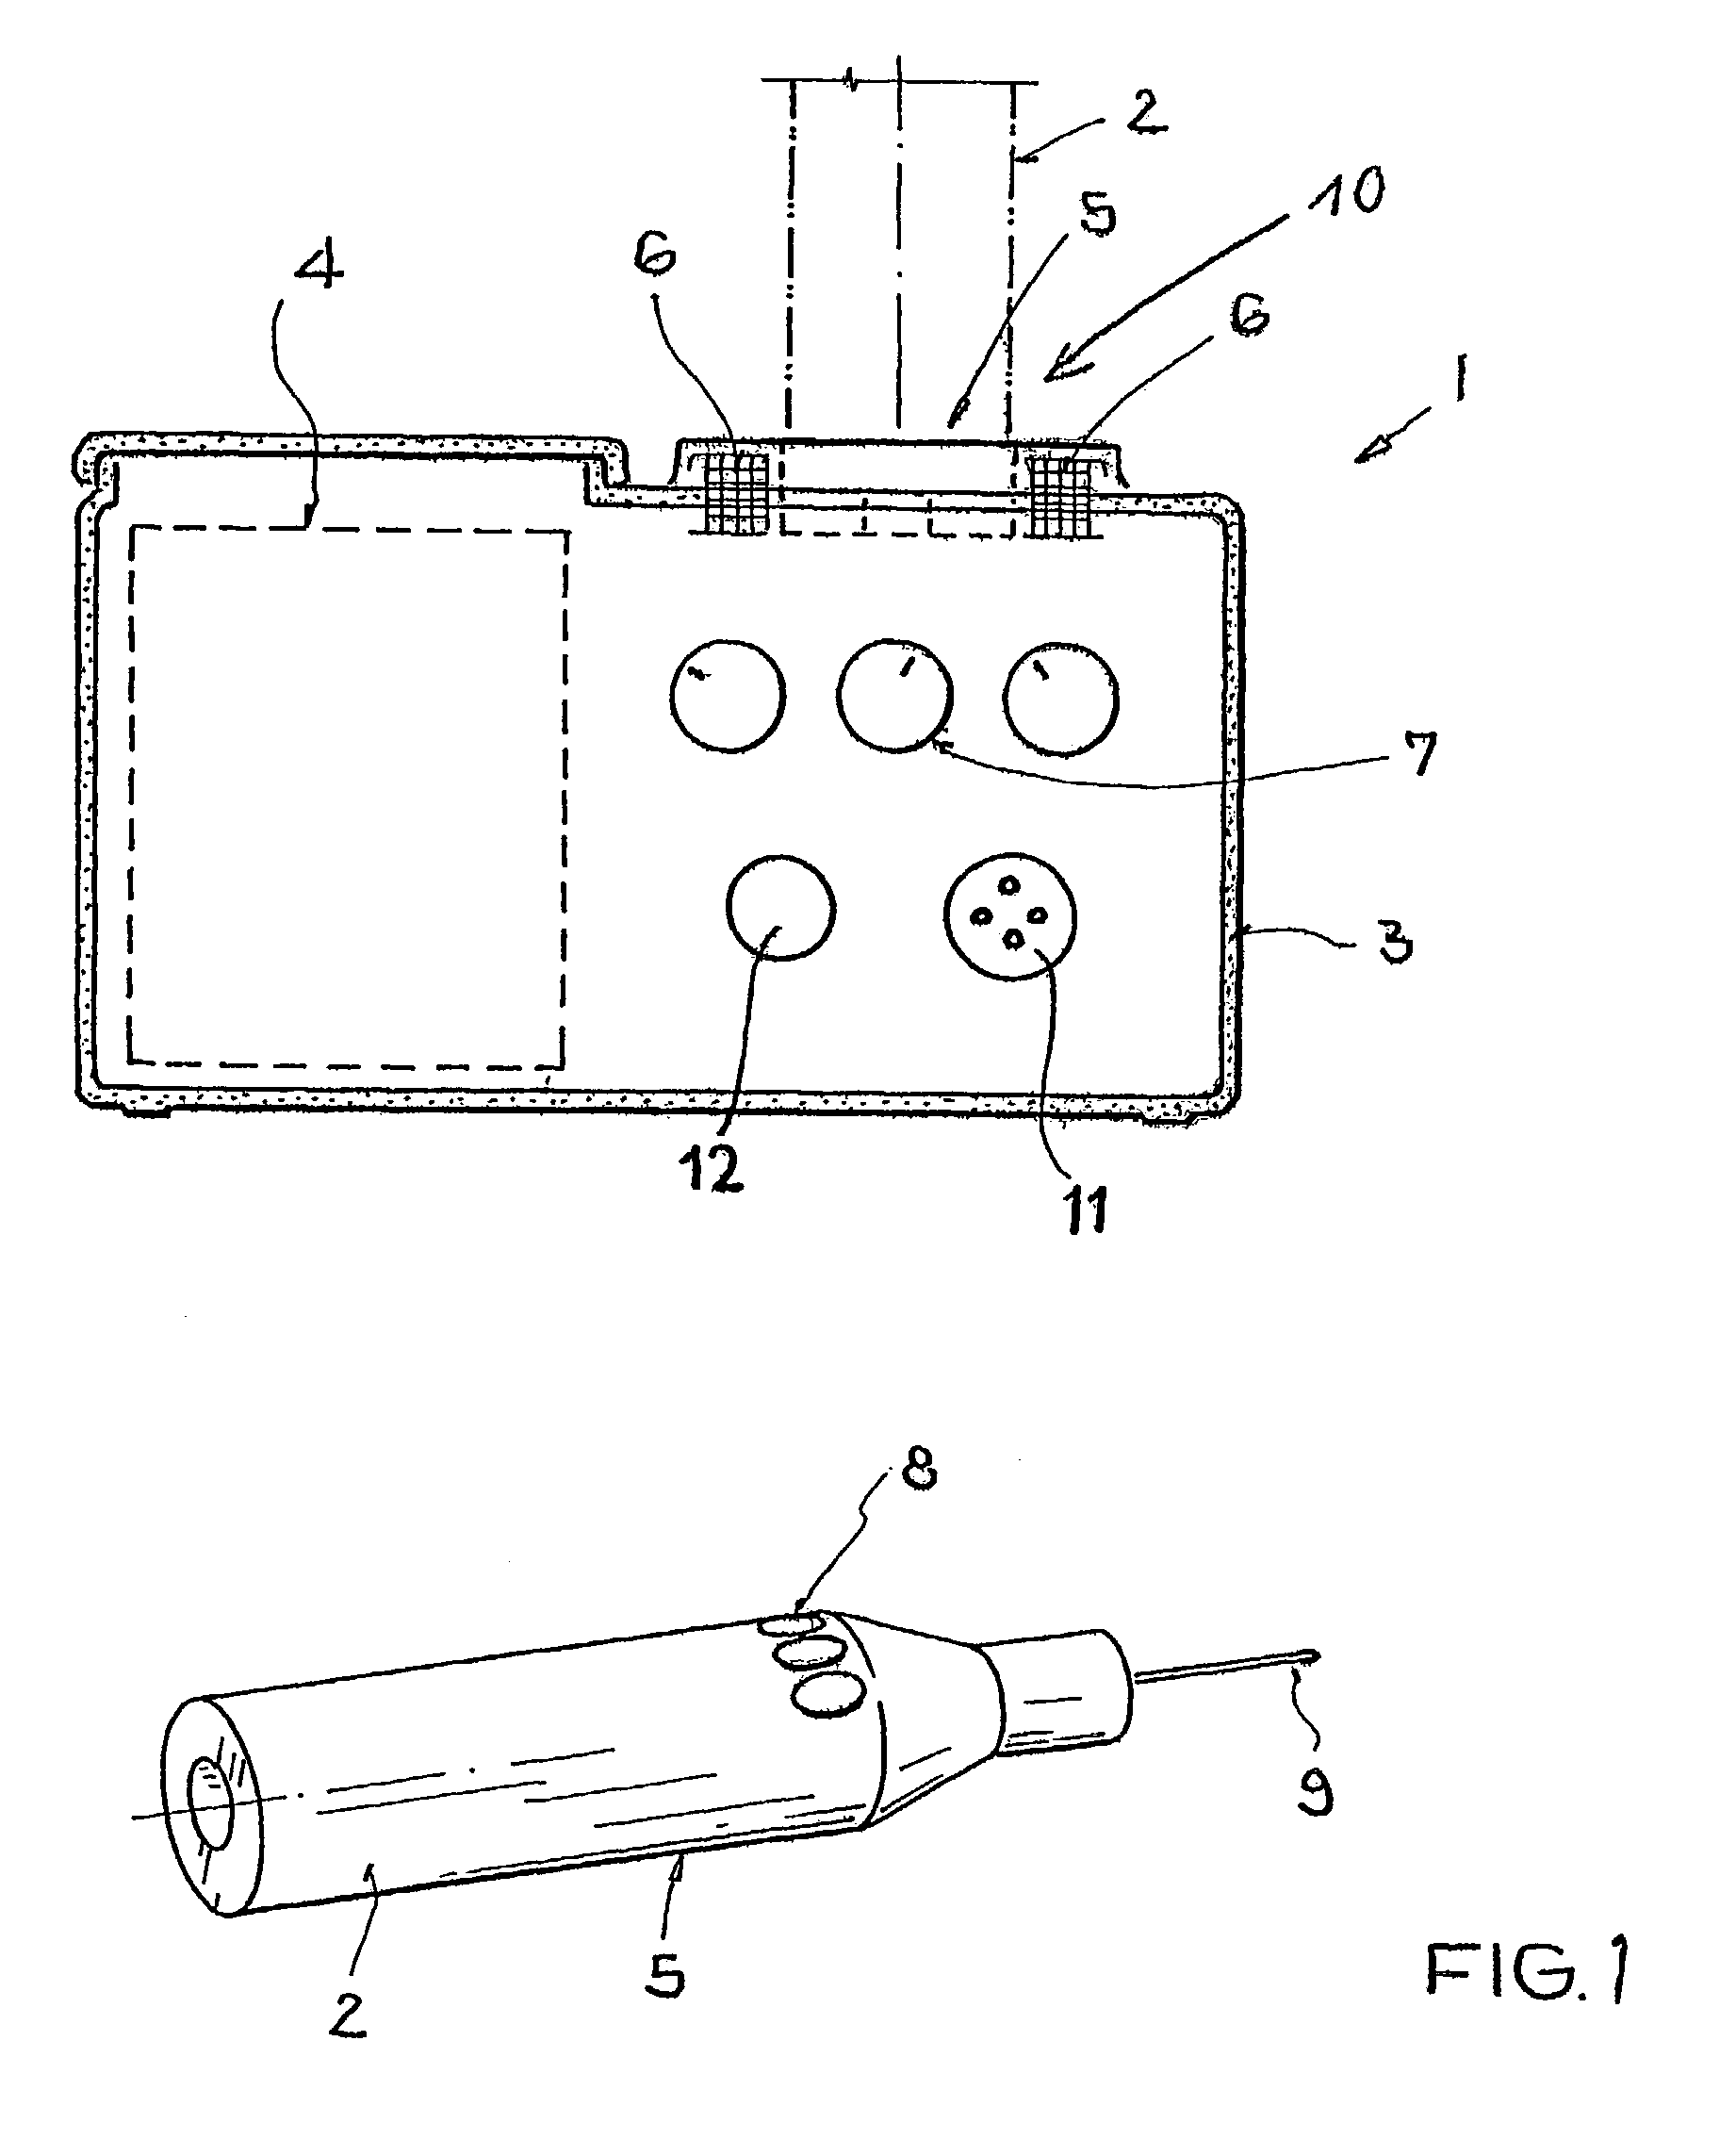 Device for supplying an electro-pen with electrical energy